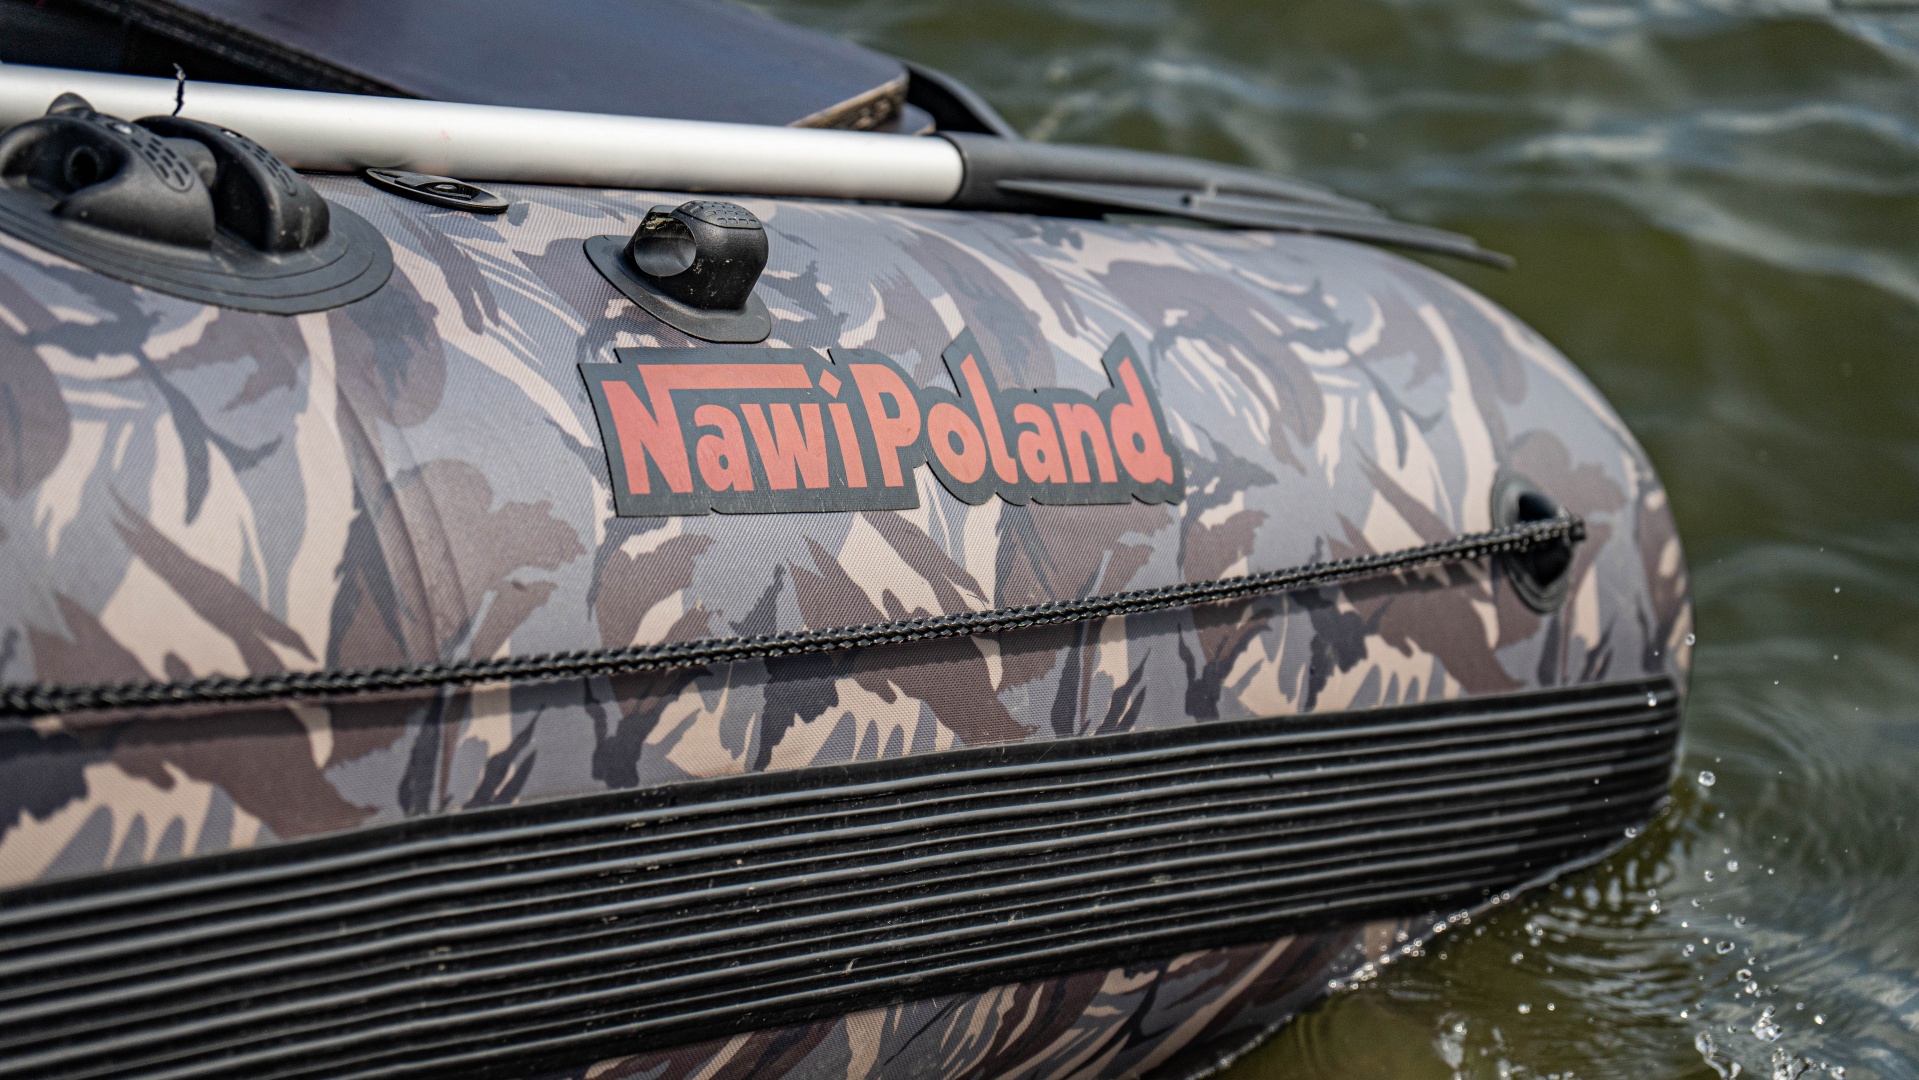 NawiPoland CAT 260 Inflatable Boat  - Катамаран